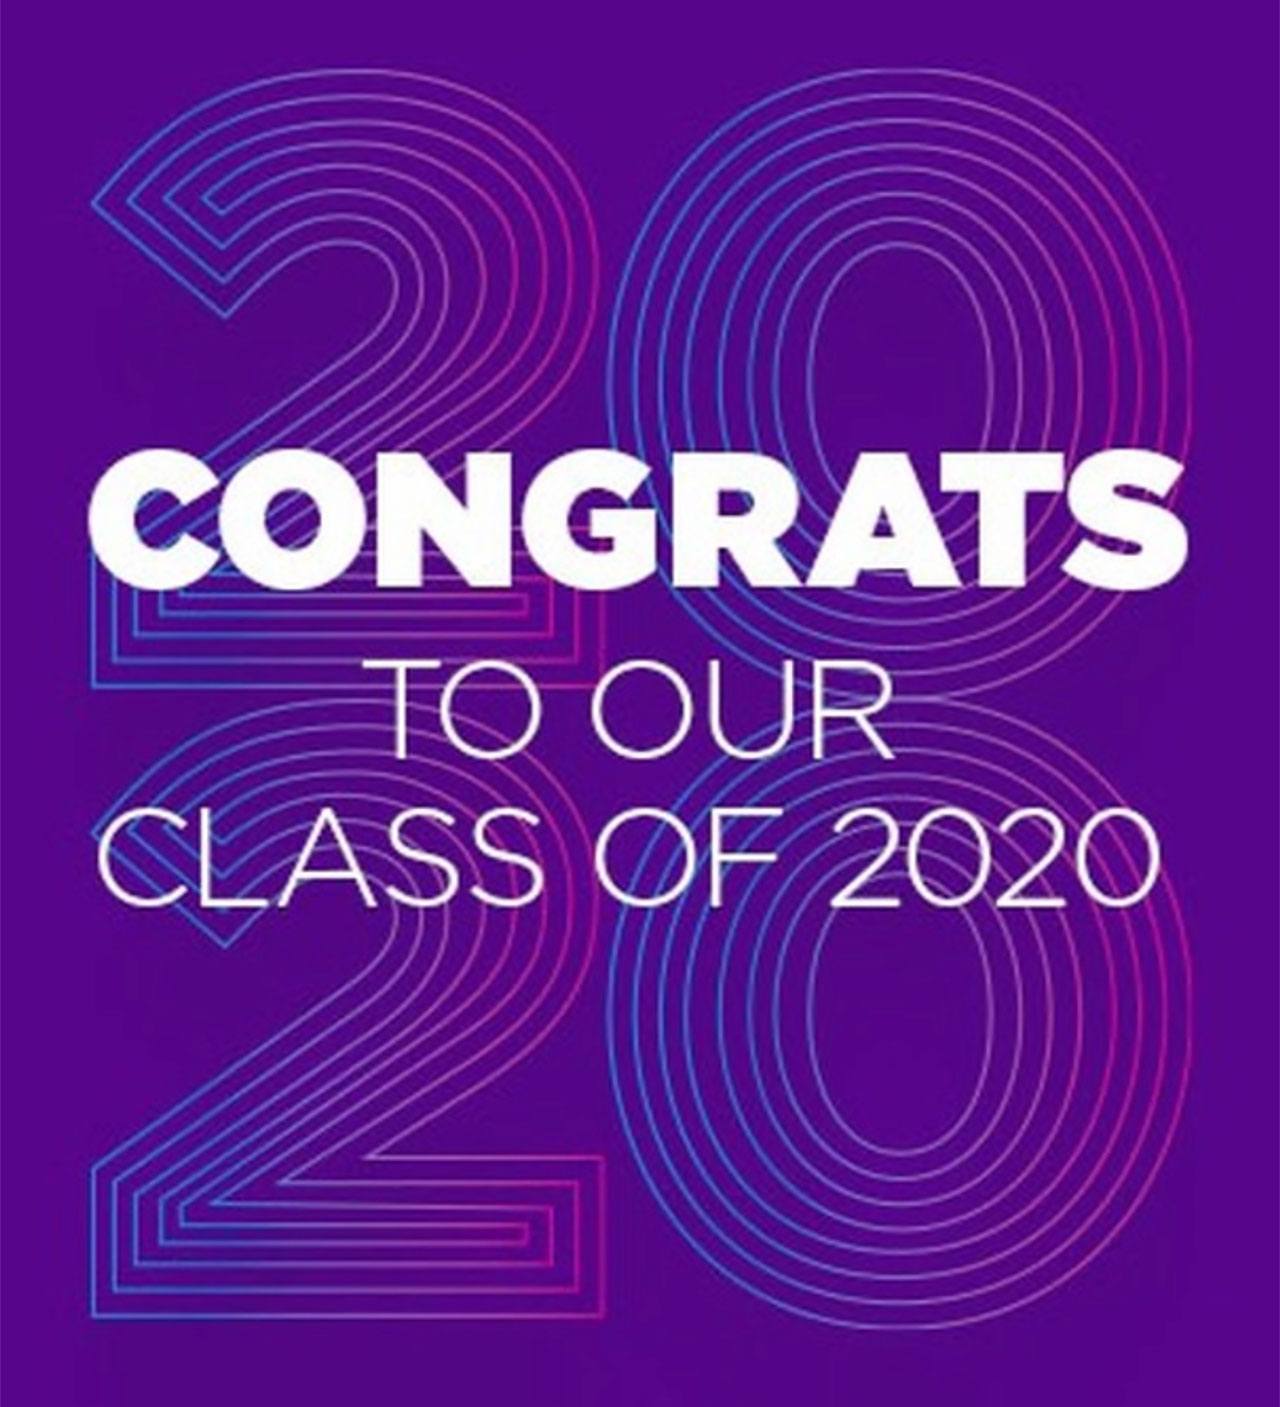 “Congrats to our Class of 2020”.